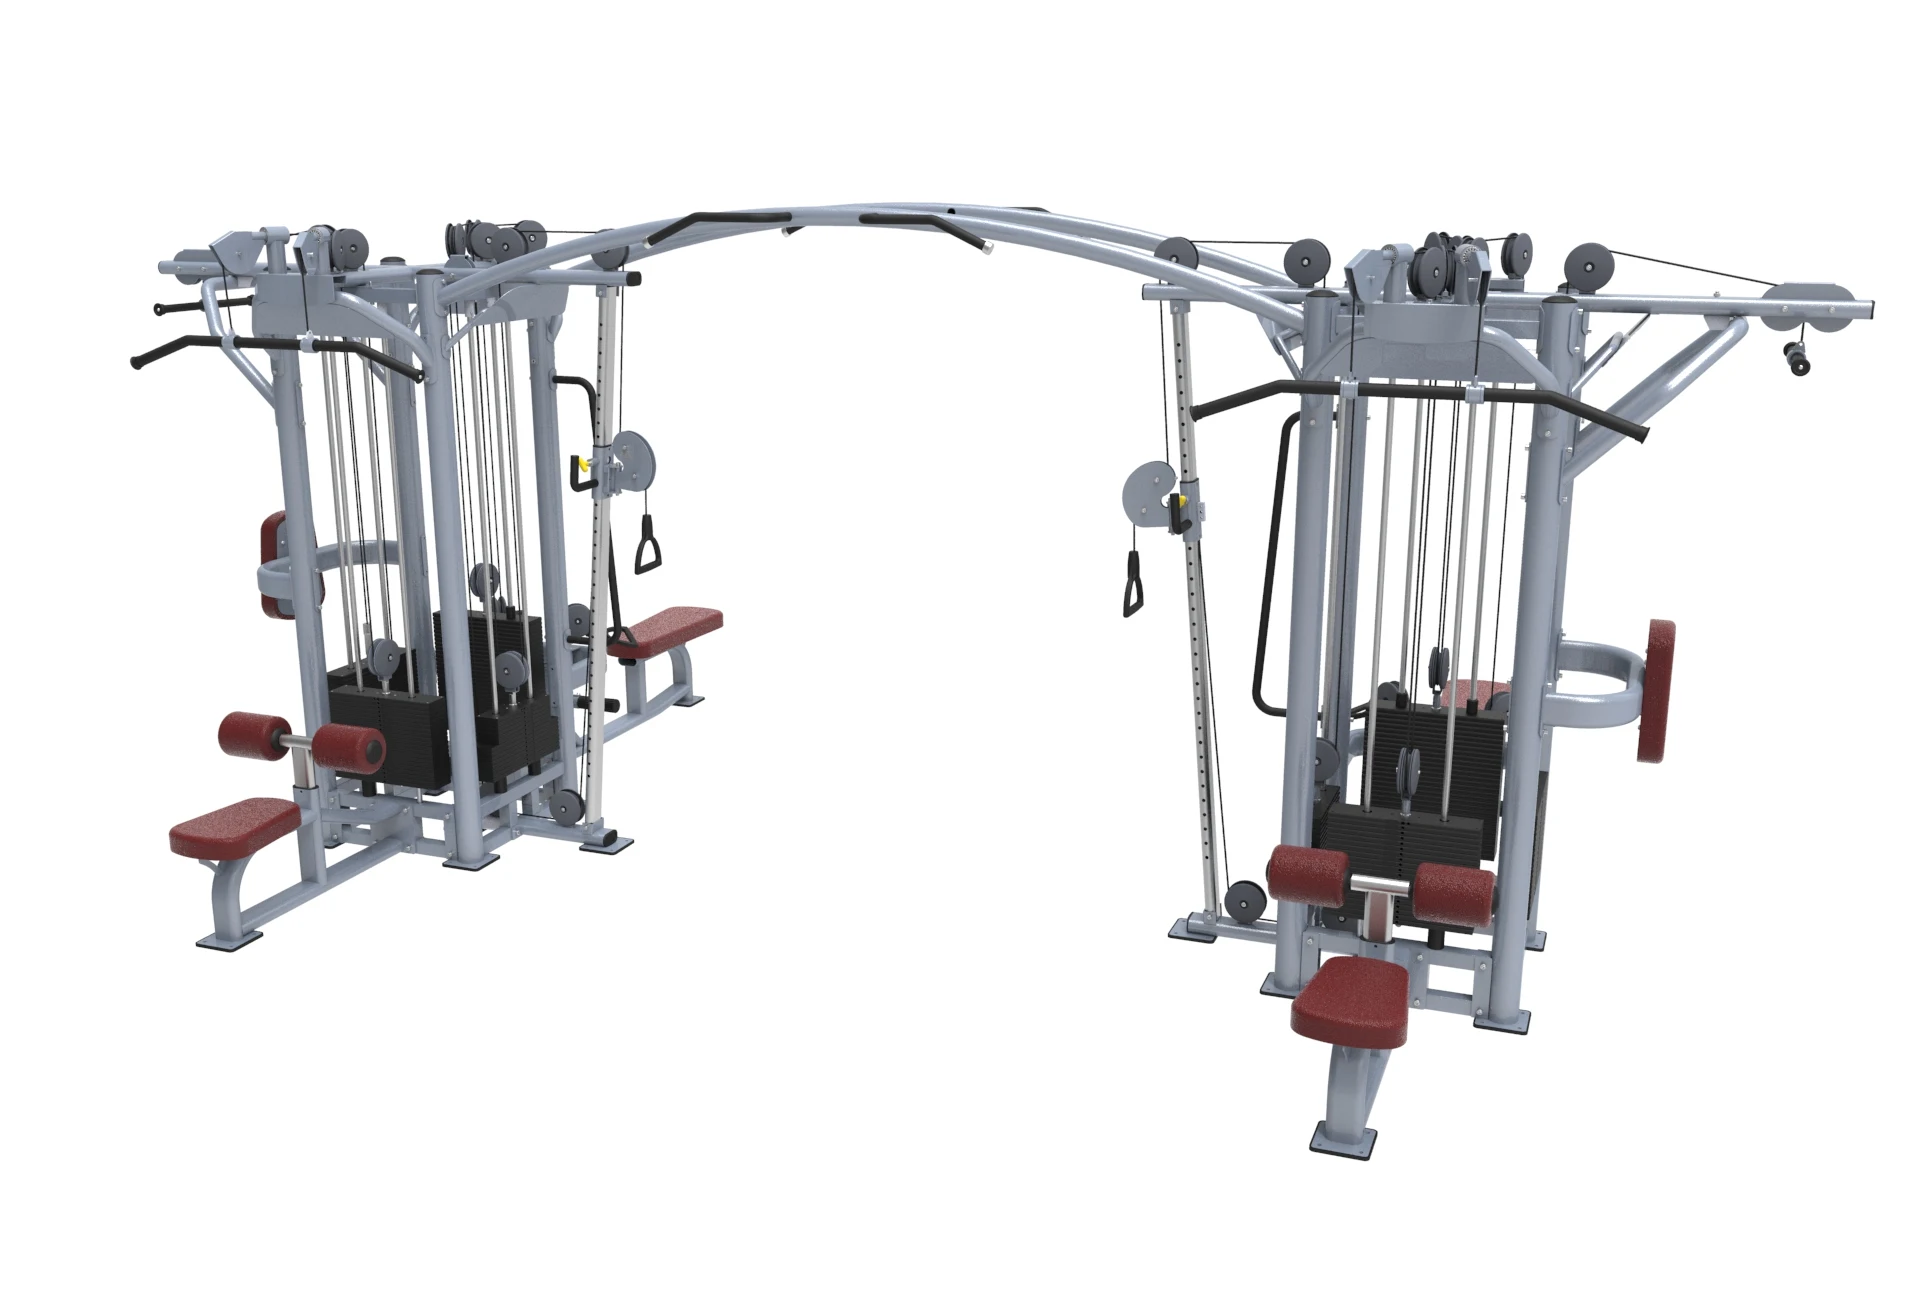 Factory Directly Sale Multi Station Gym Equipment - Buy Multi Station